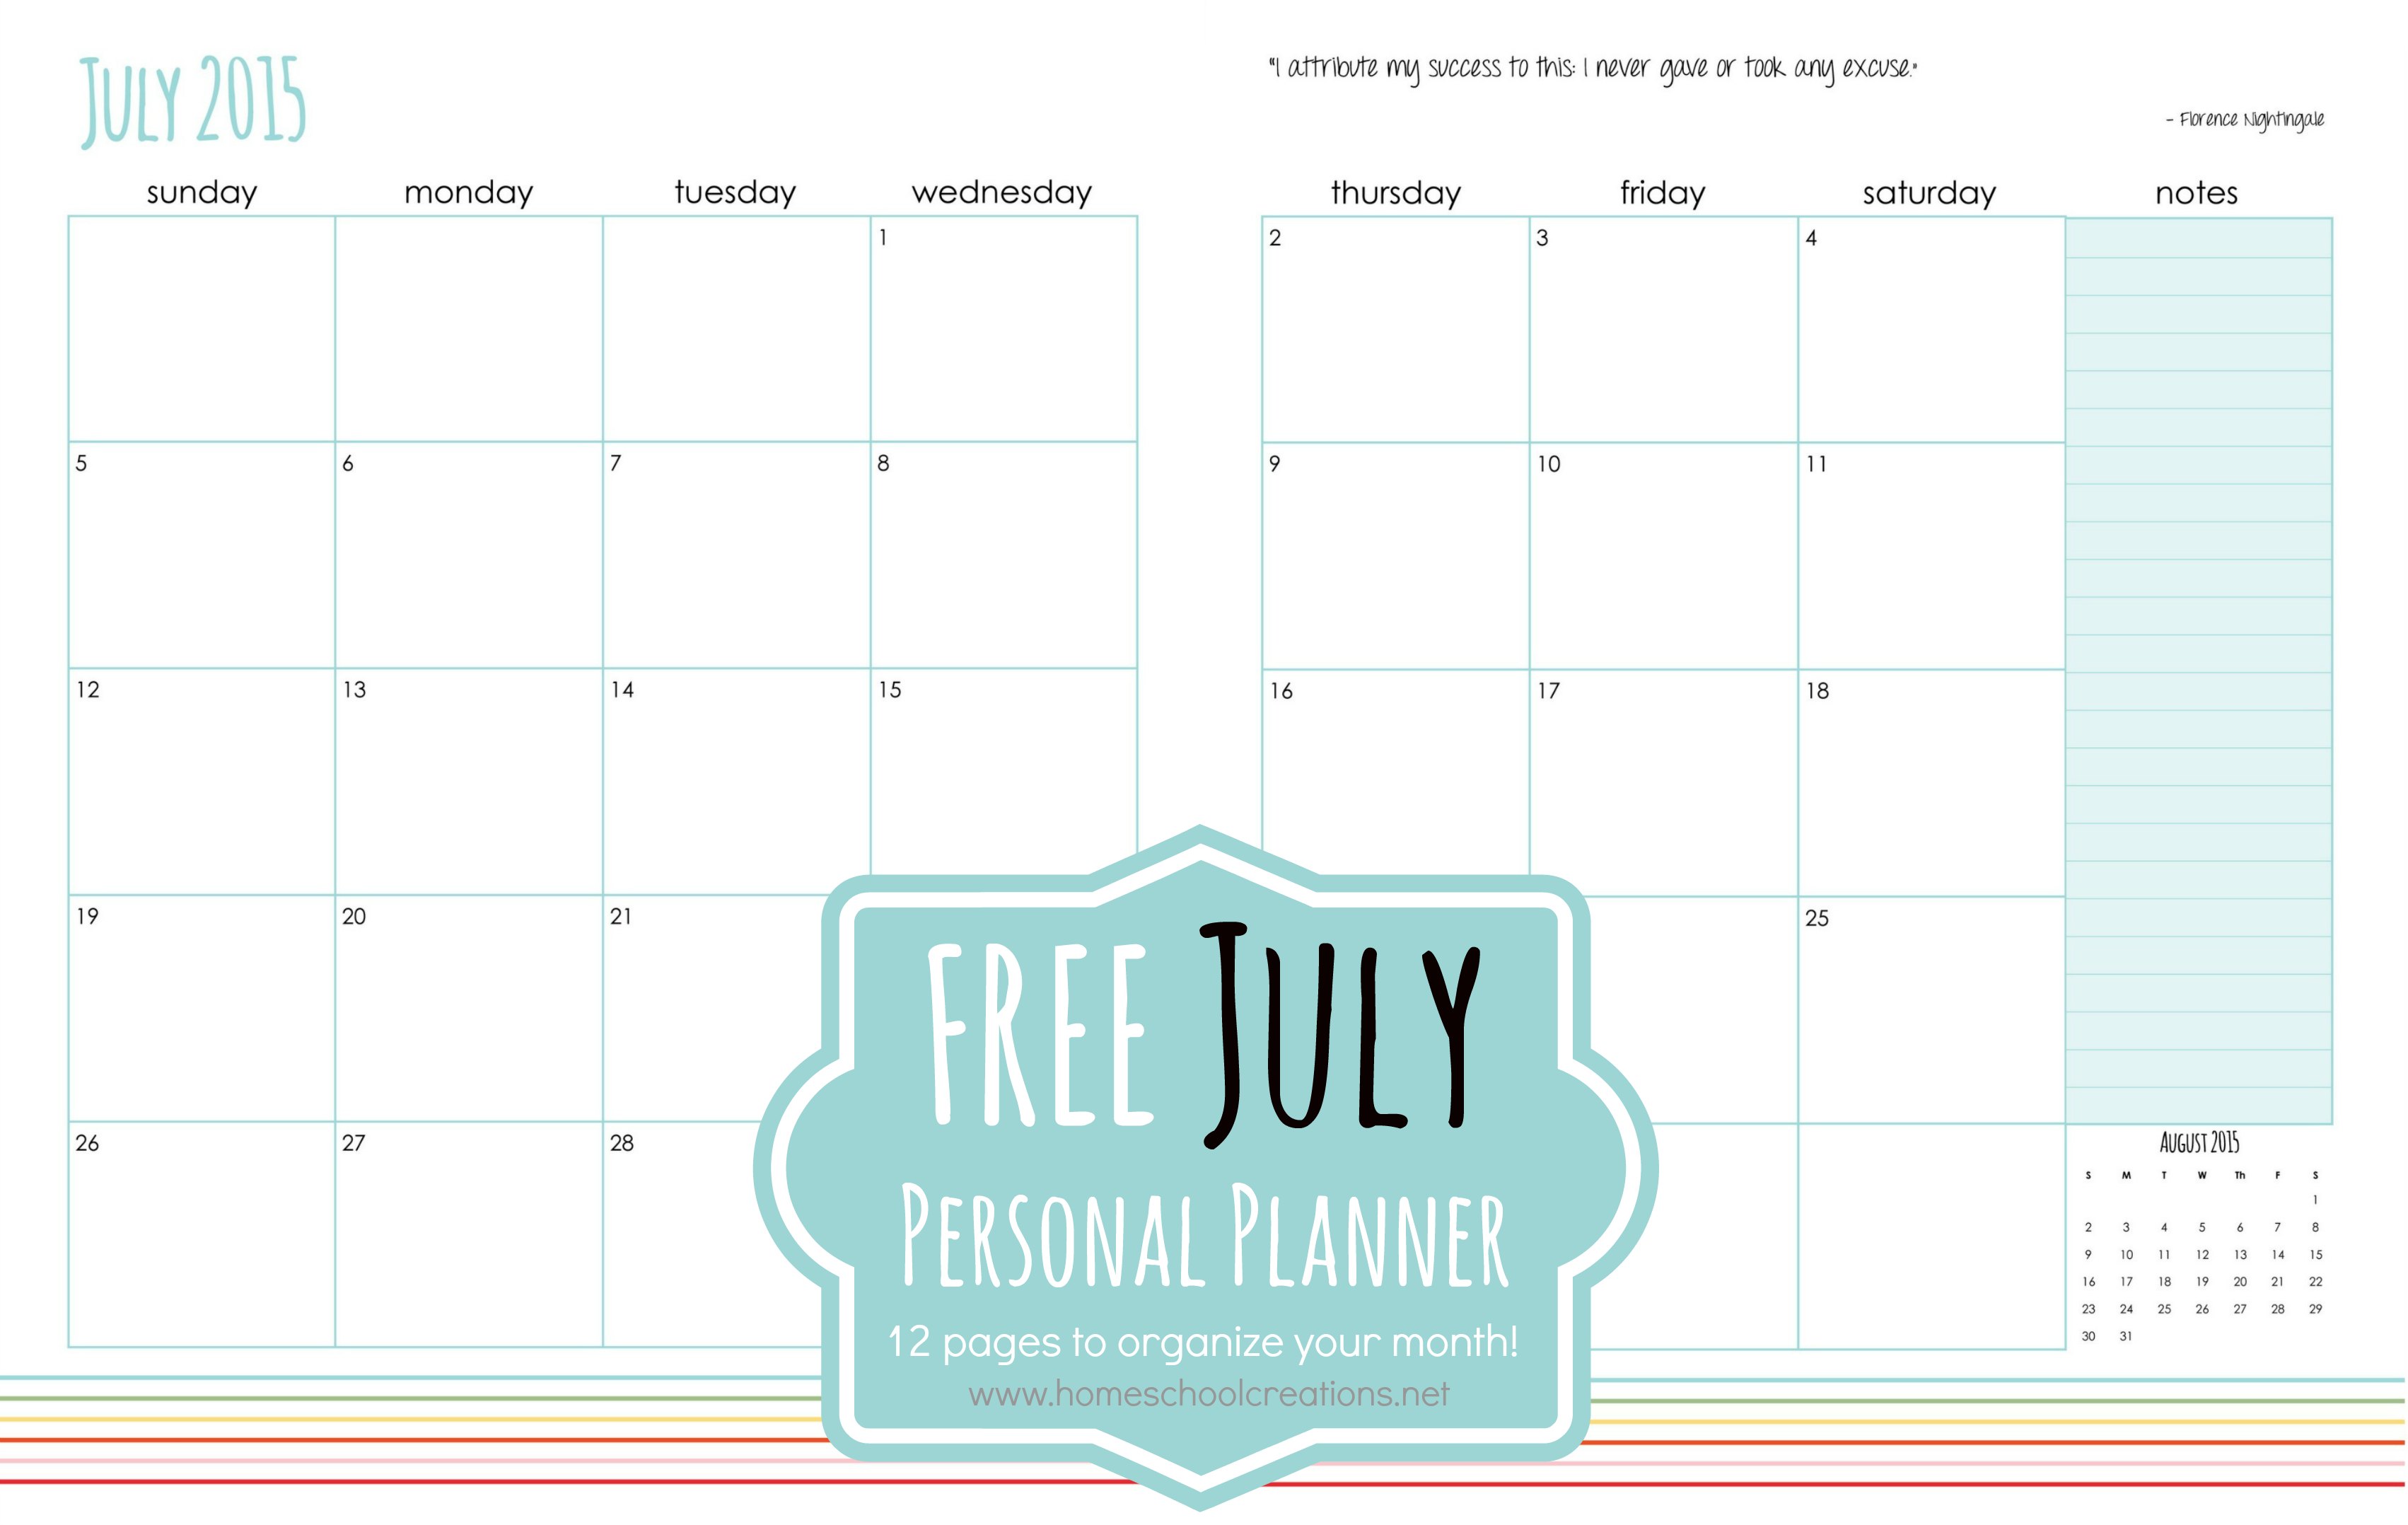 July 2015 Daily Planner pages